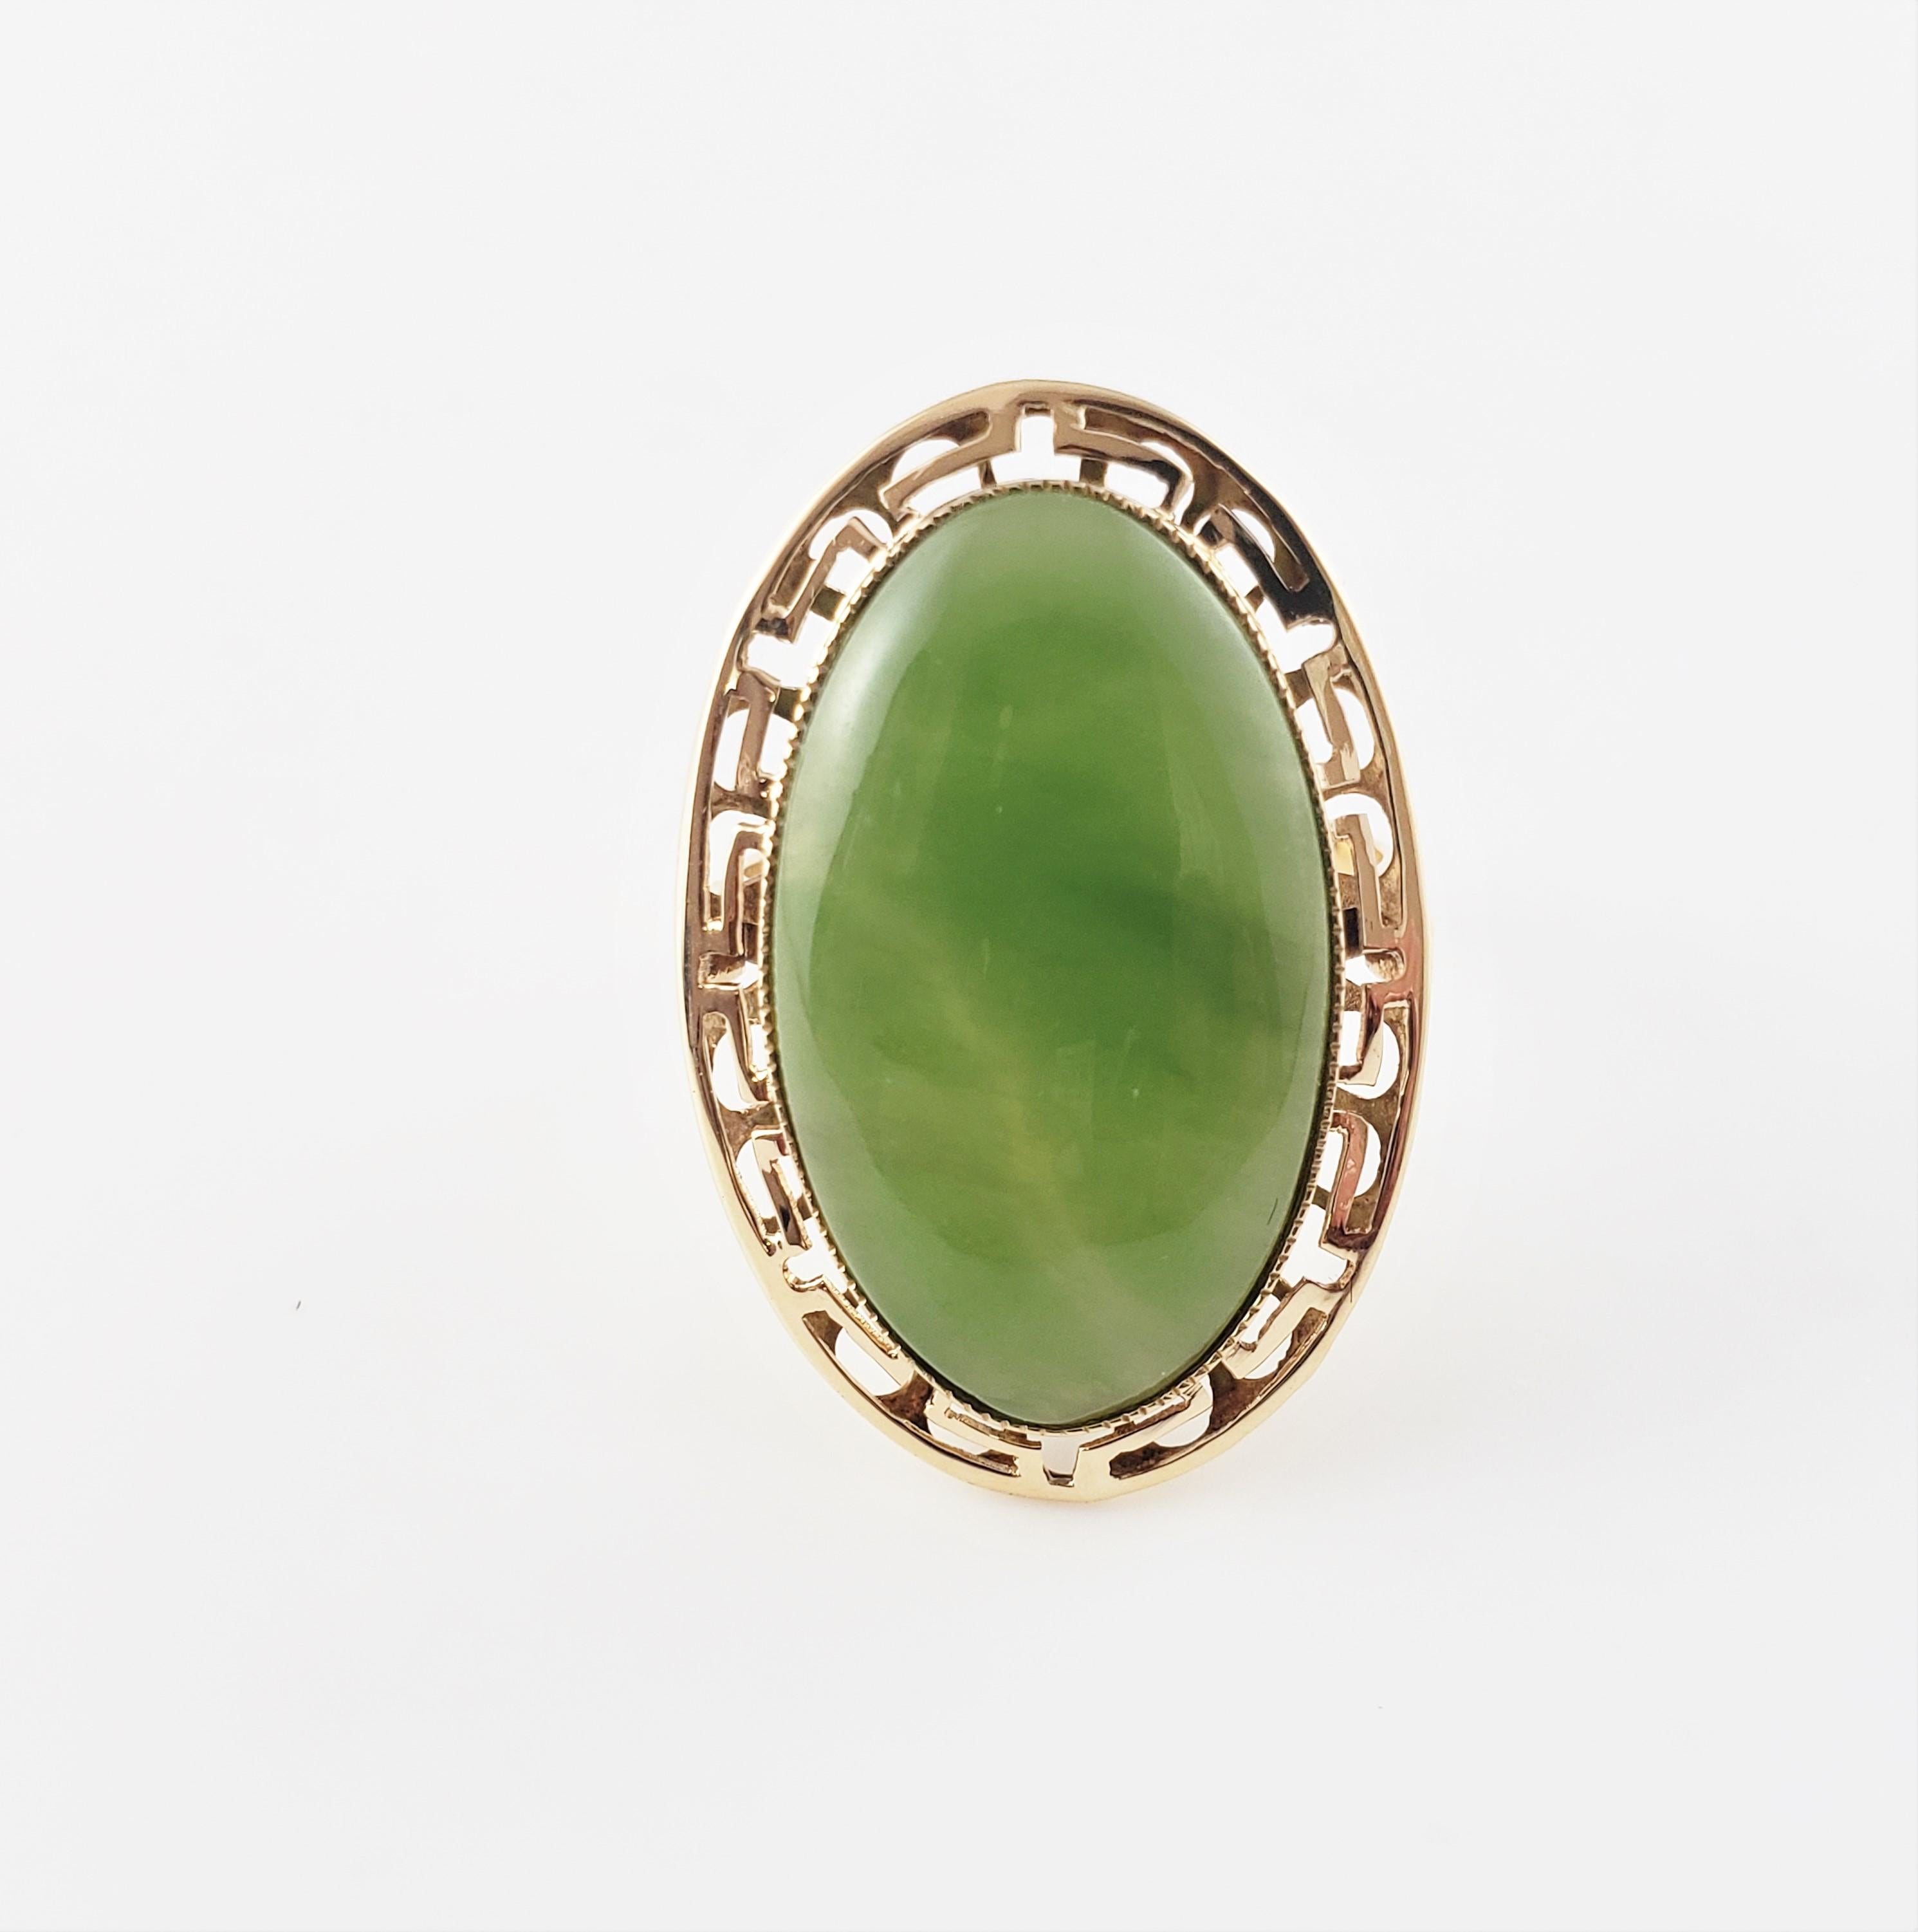 Vintage 14 Karat Yellow Gold and Genuine Jade Ring Size 8.75-

This elegant ring features one oval genuine jade stone (25 mm x 15 mm) set in beautifully detailed 14K yellow gold. Top of ring measures
29 mm x 20 mm. Shank measures 2 mm.

Ring Size: